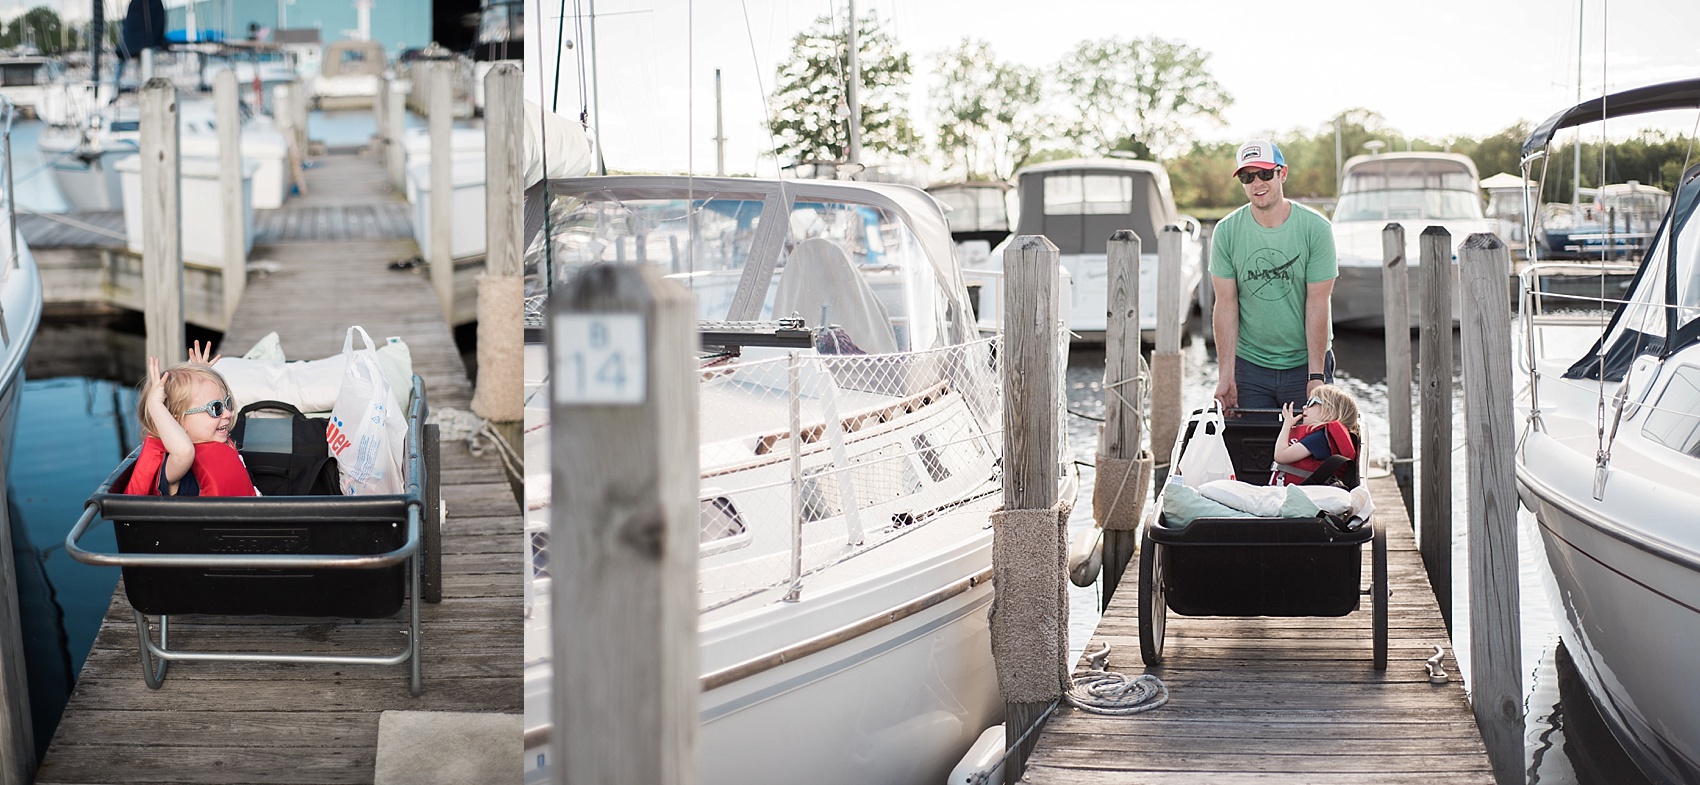 Michigan wedding and lifestyle photographer, Allie Siarto, shares a photo of her husband and daughters at Great Lakes Marina in Muskegon, Michigan